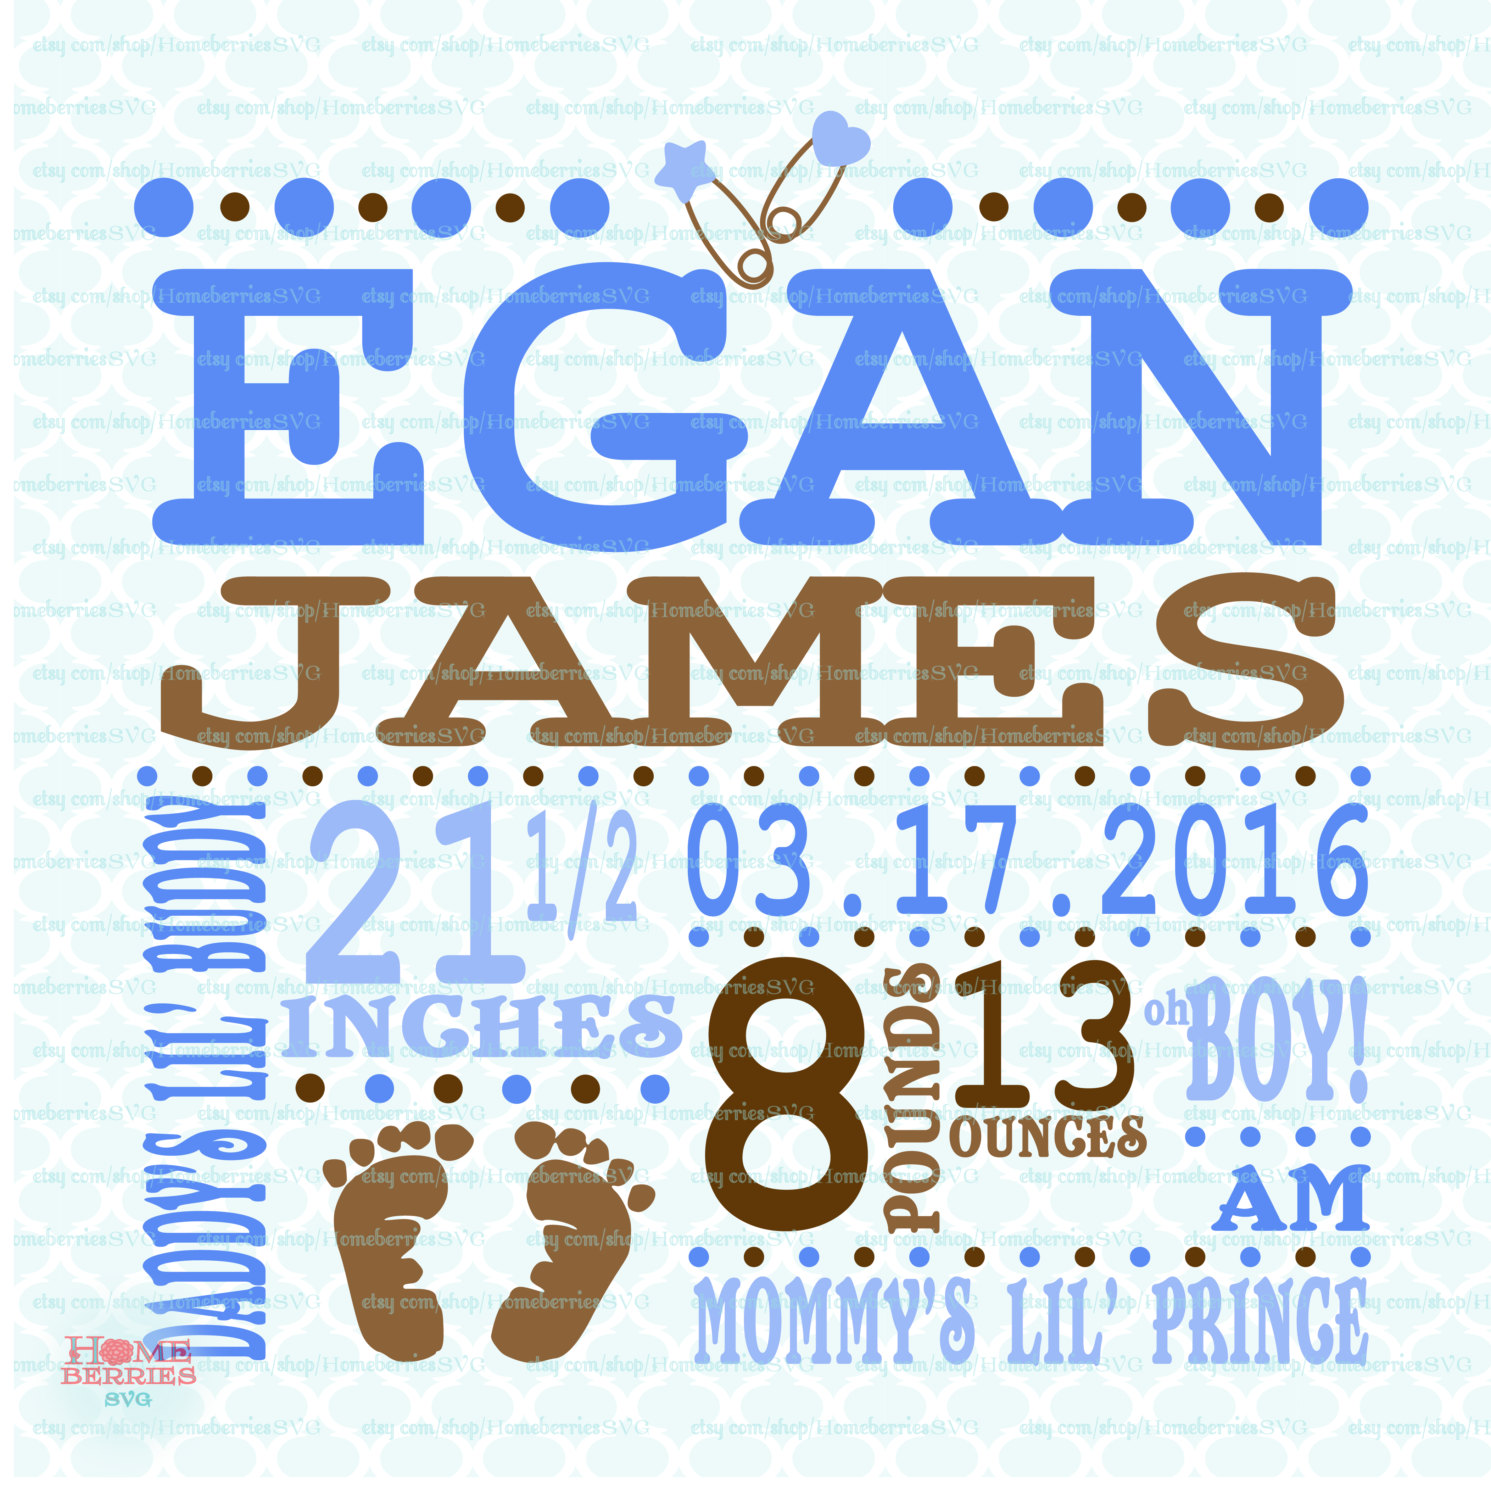 Birth Announcement PNG - 138619